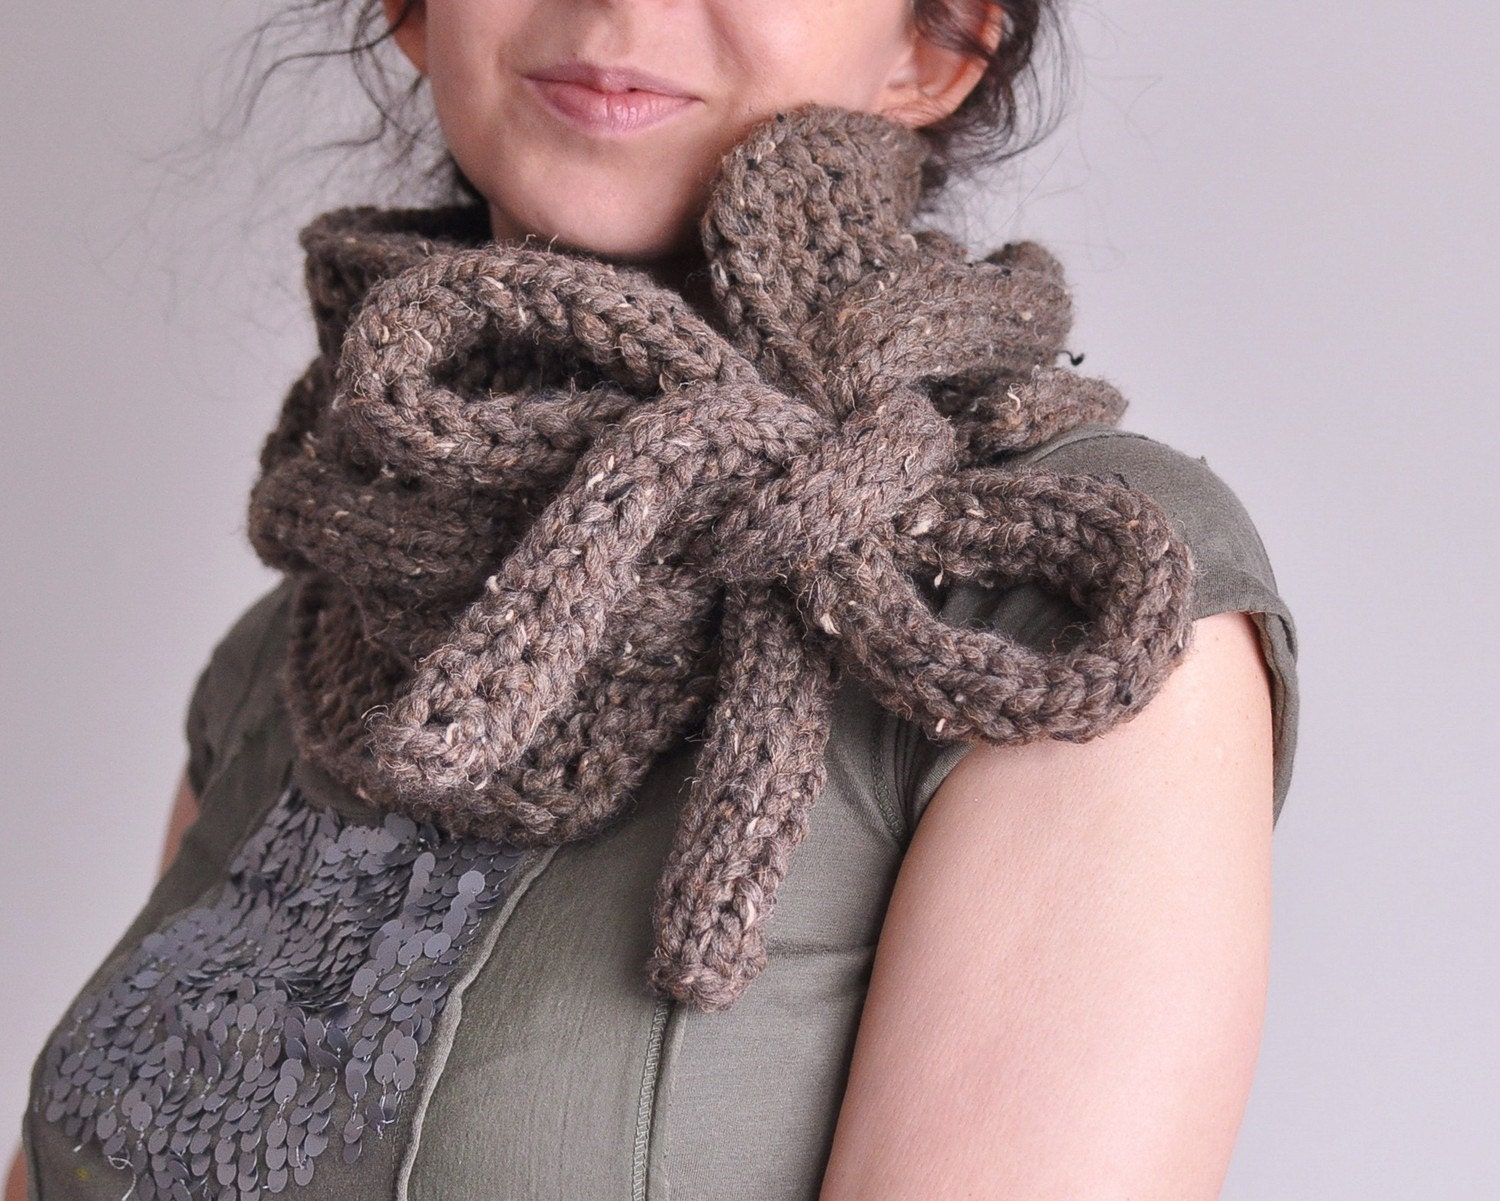 Twist Me Around - handknit superchunky cabled neckwarmer / scarf / collar / cowl / wrap with long drawstrings in color of your choice